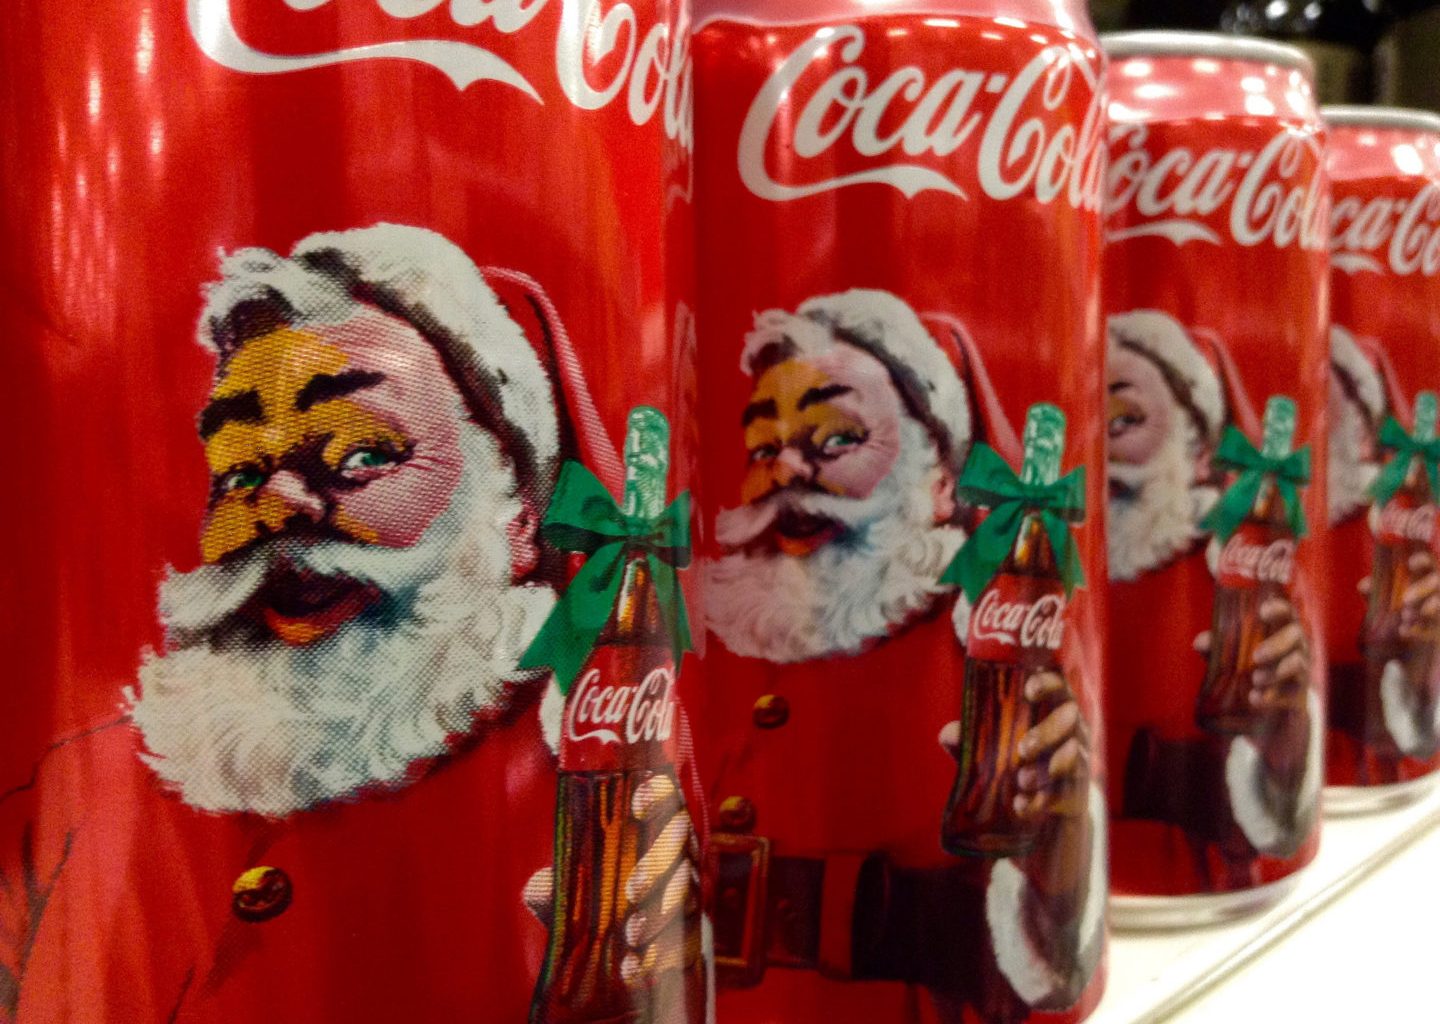 No, Santa Claus was not first dressed in red by Coca-Cola 4